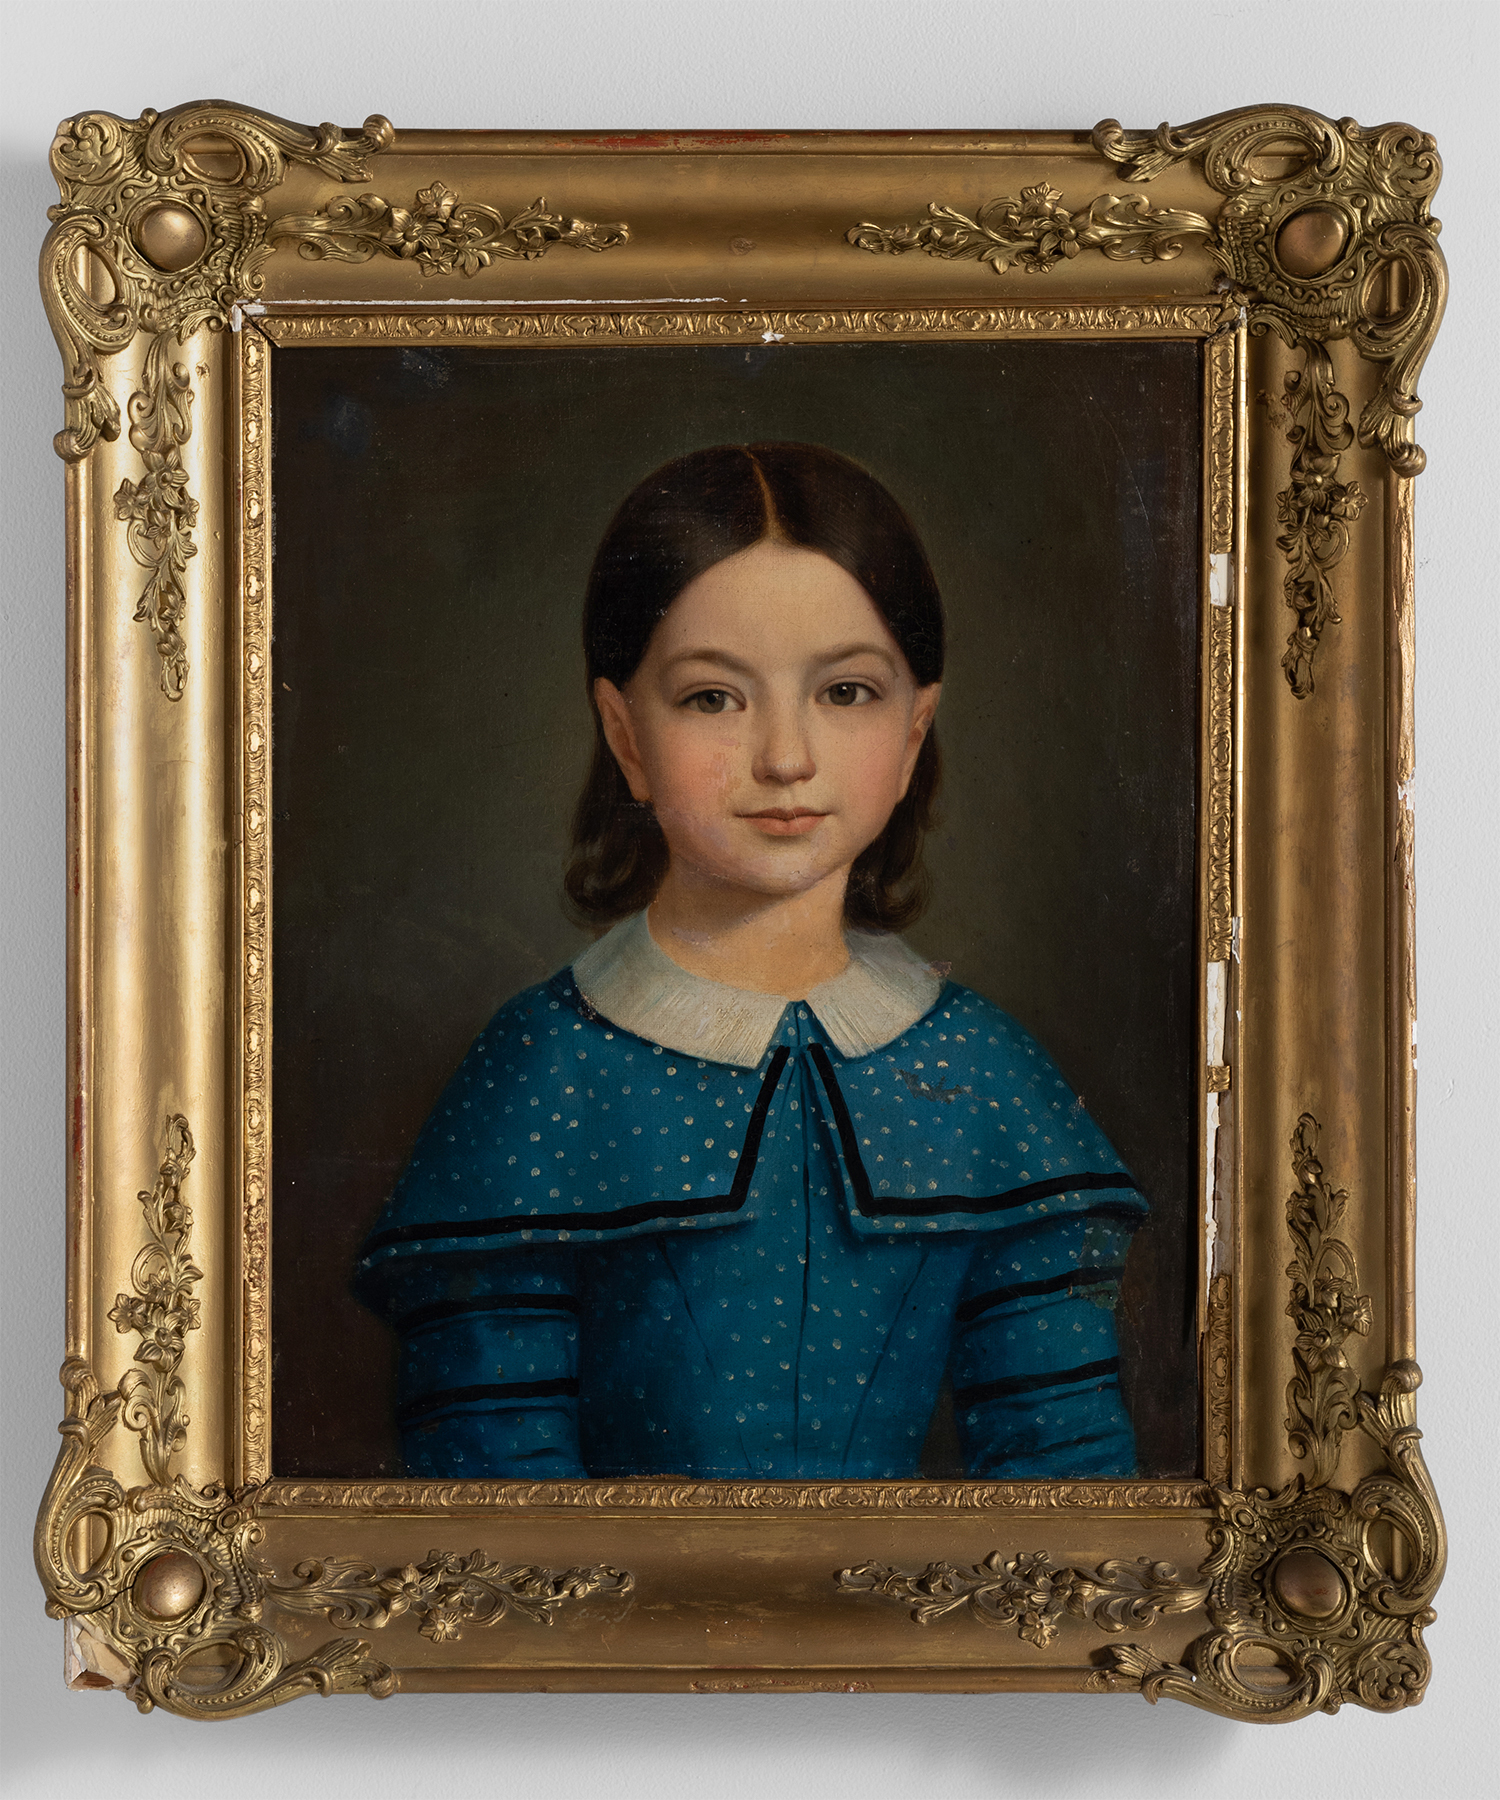 All 100+ Images famous painting of girl in blue dress Stunning